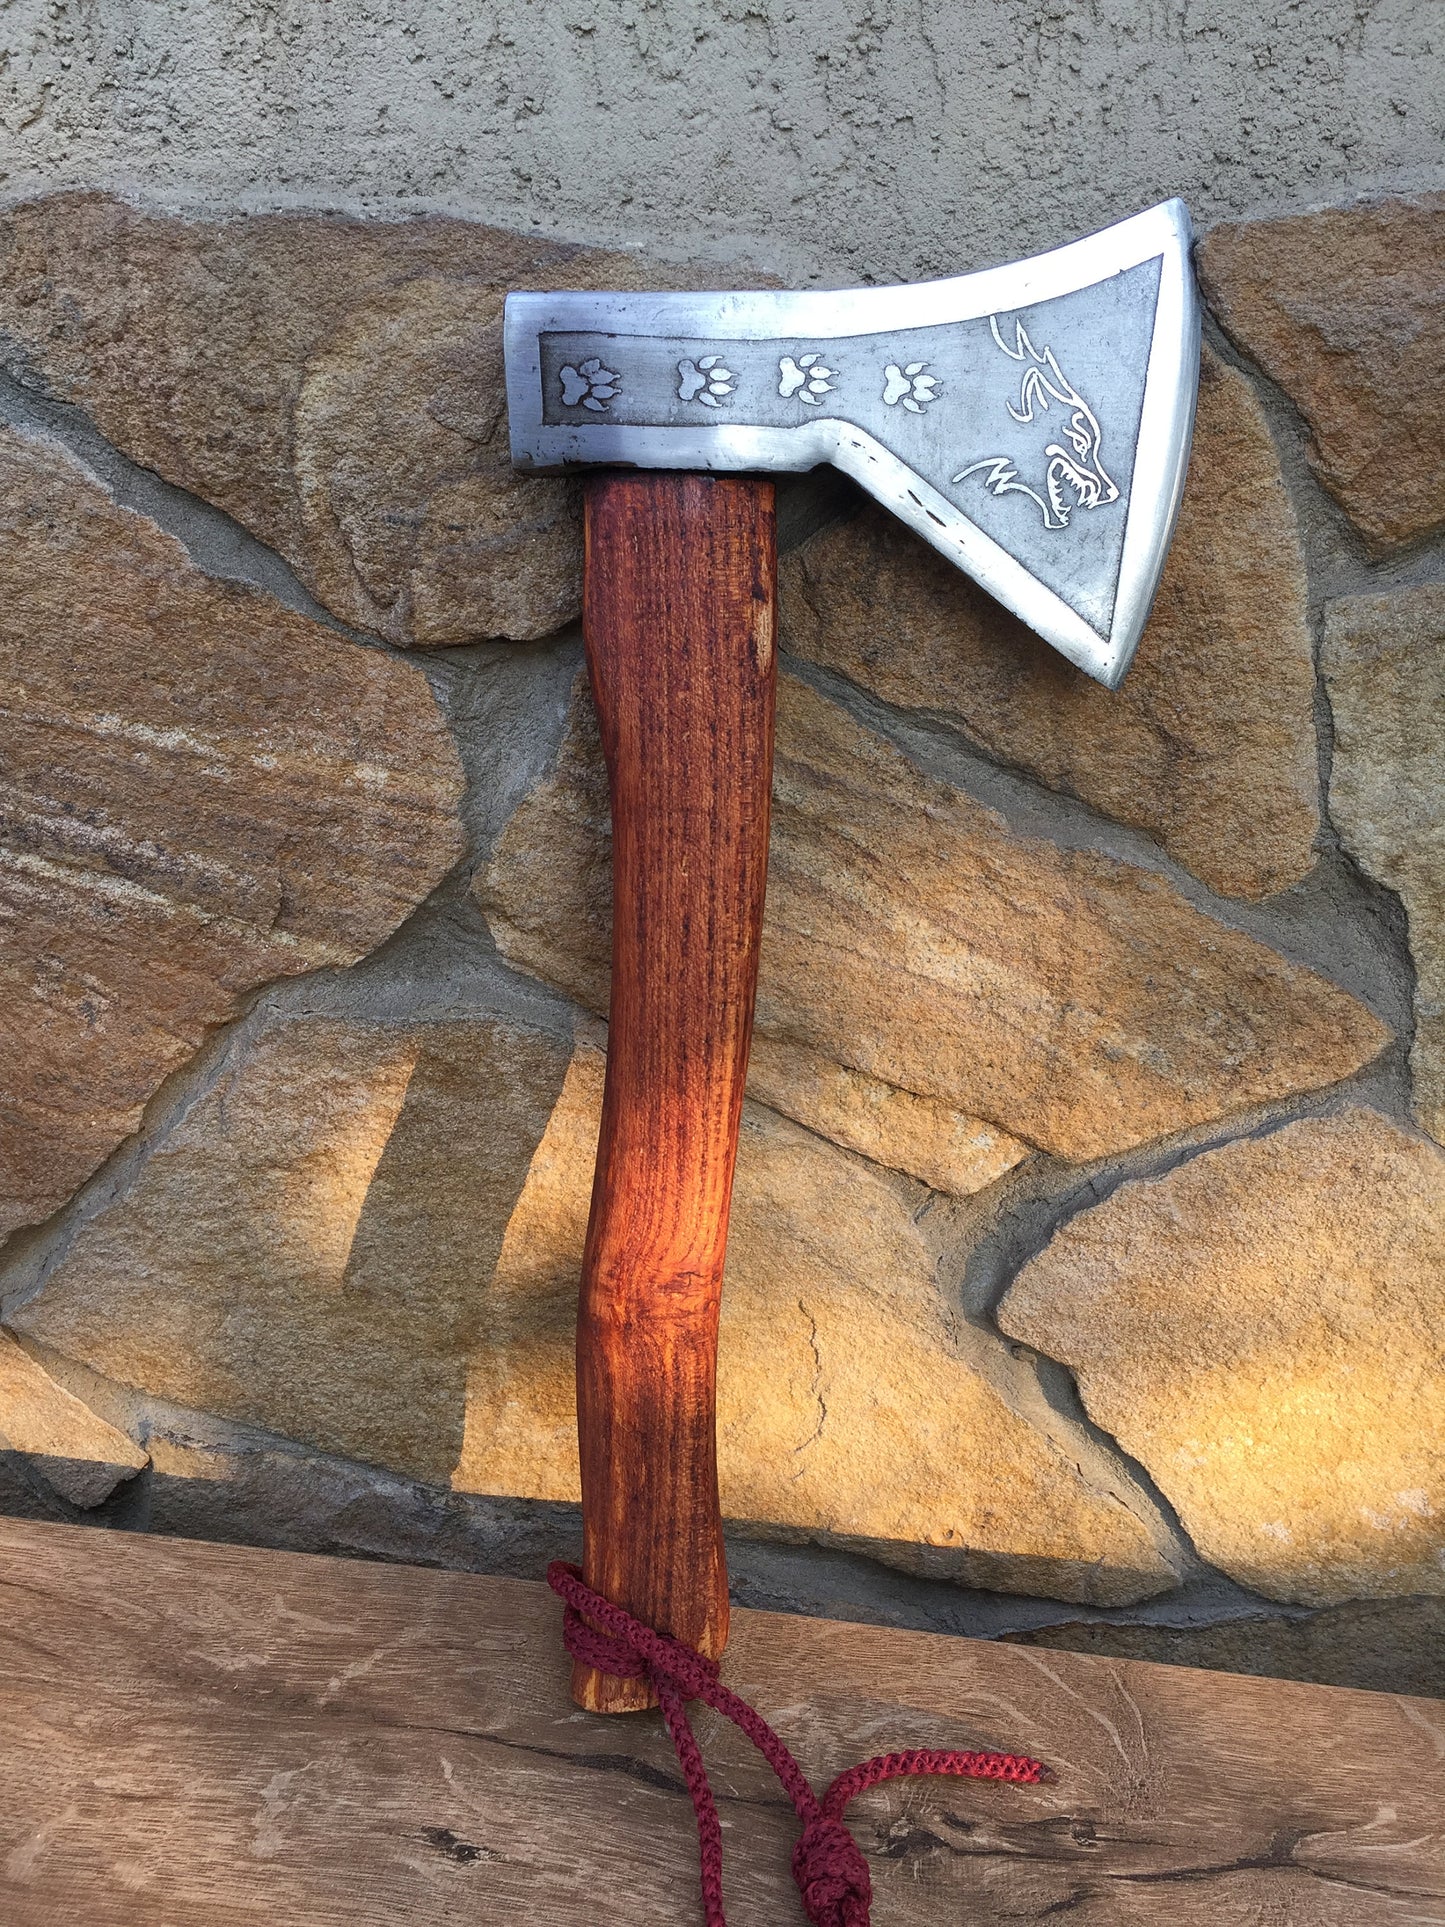 Medieval axe, viking axe, mens gifts, iron gift for him, tomahawk, hatchet, hiking, hunting, chopping axe, gifts for men, manly iron gifts